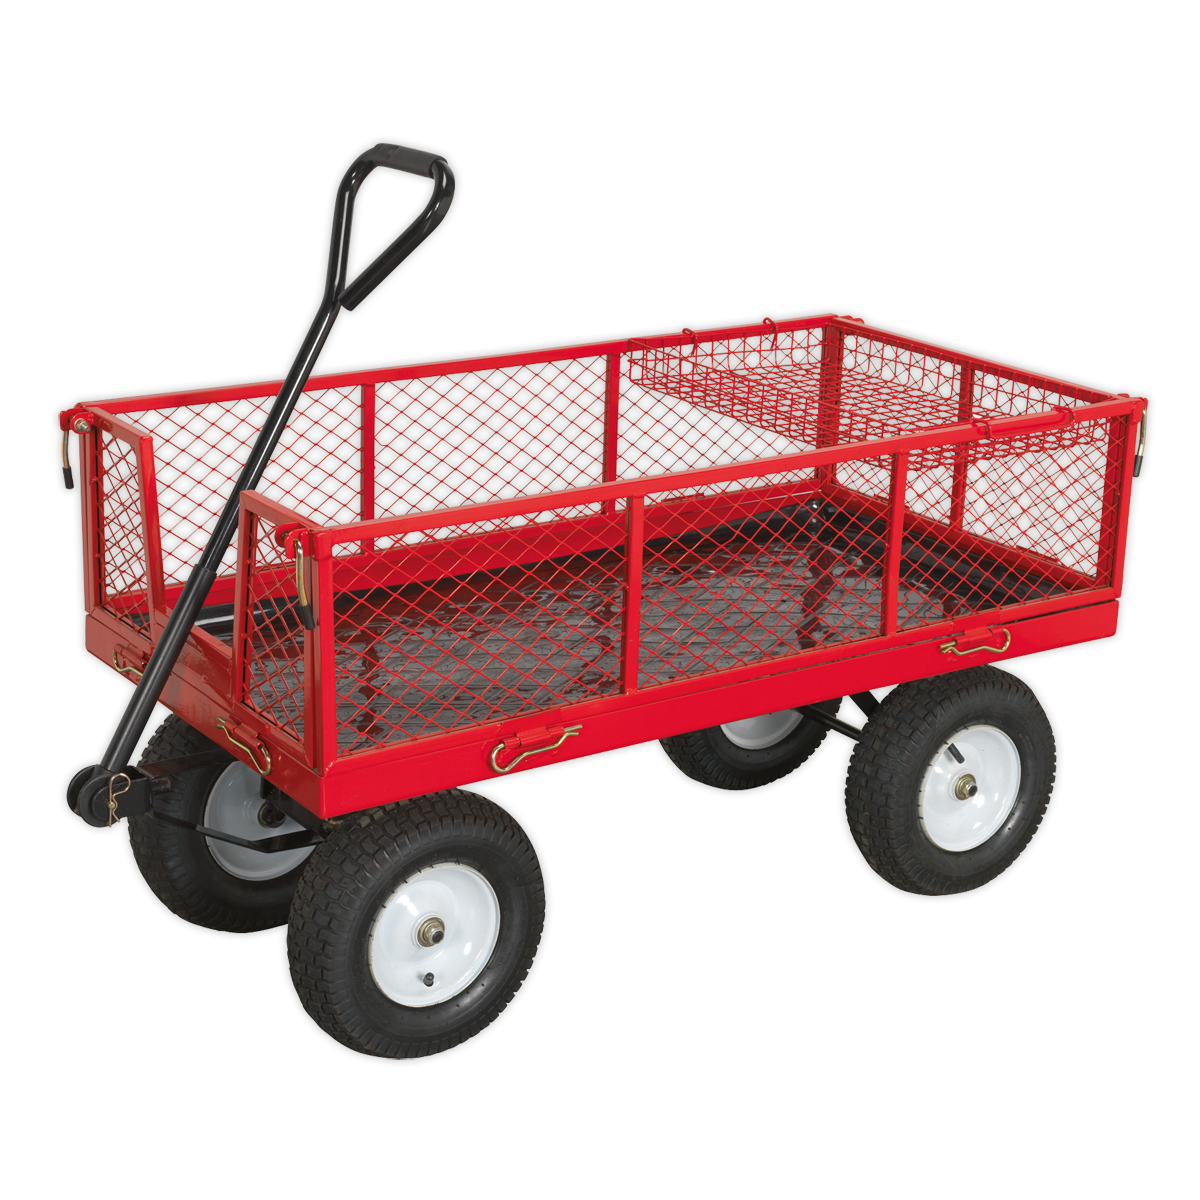 Platform Truck with Sides Pneumatic Tyres 450kg Capacity - CST806 - Farming Parts